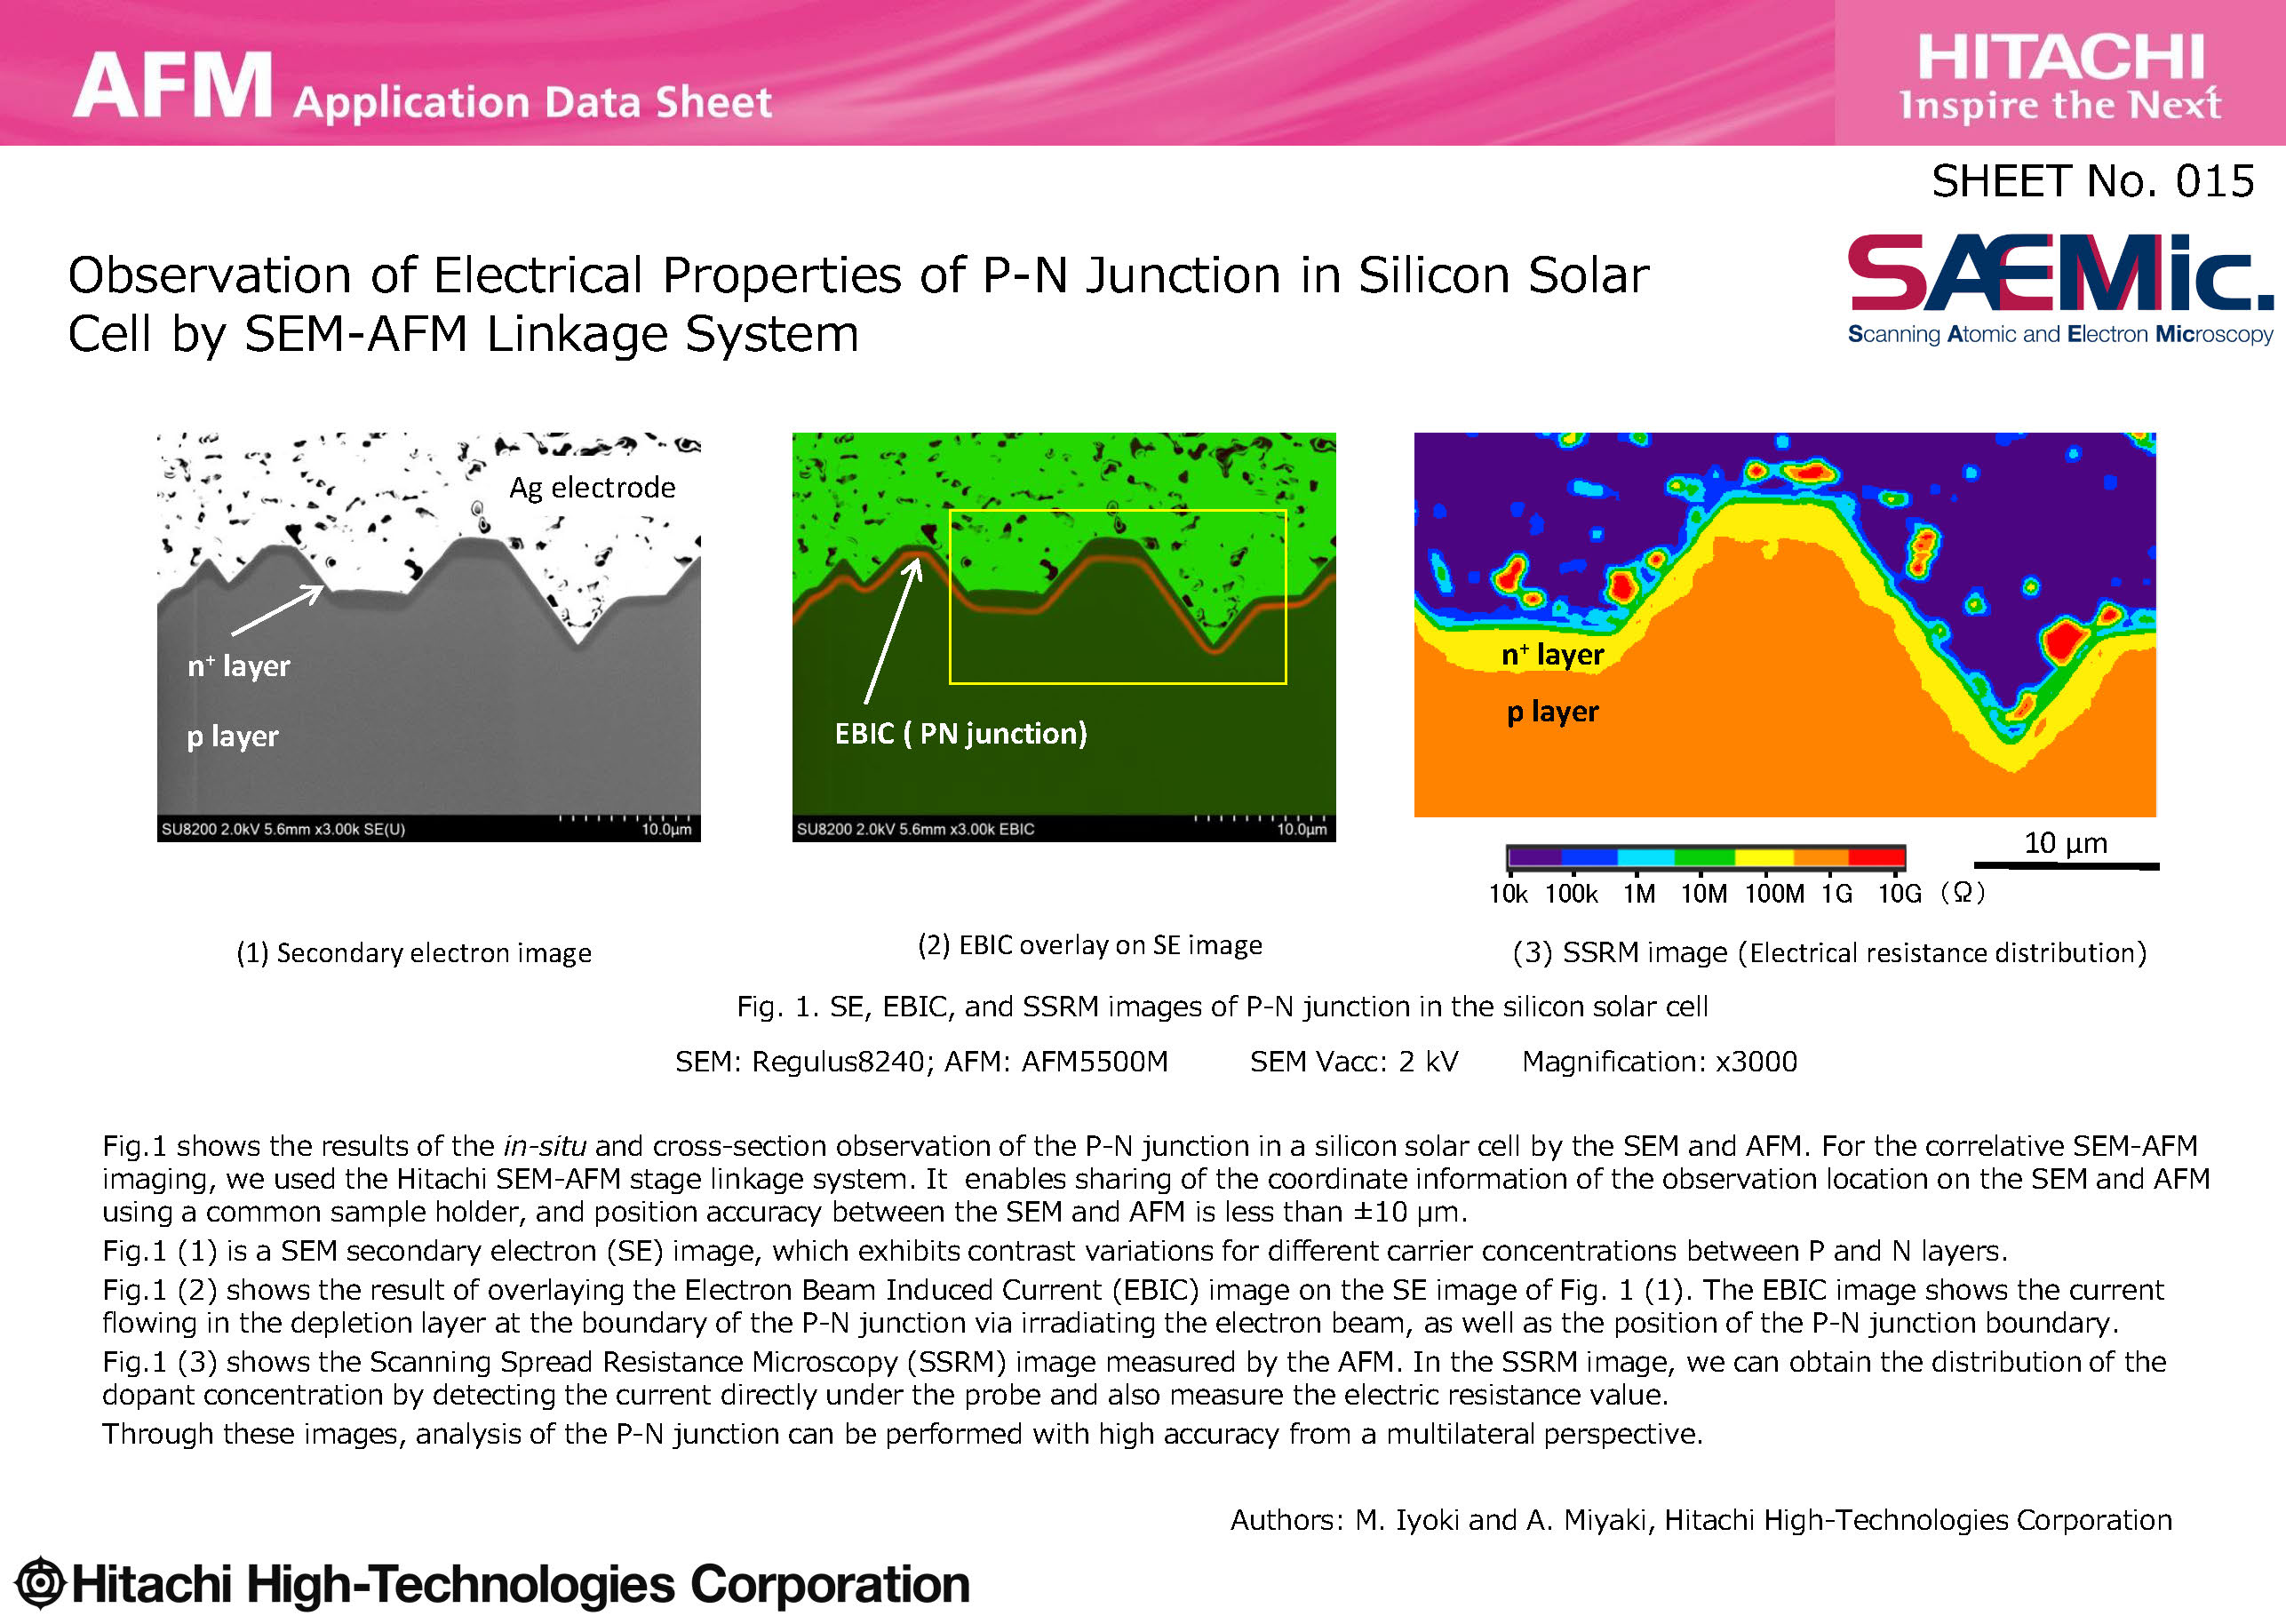 Observation of Electrical Properties of P-N Junction in Silicon Solar Cell by SEM-AFM Linkage System